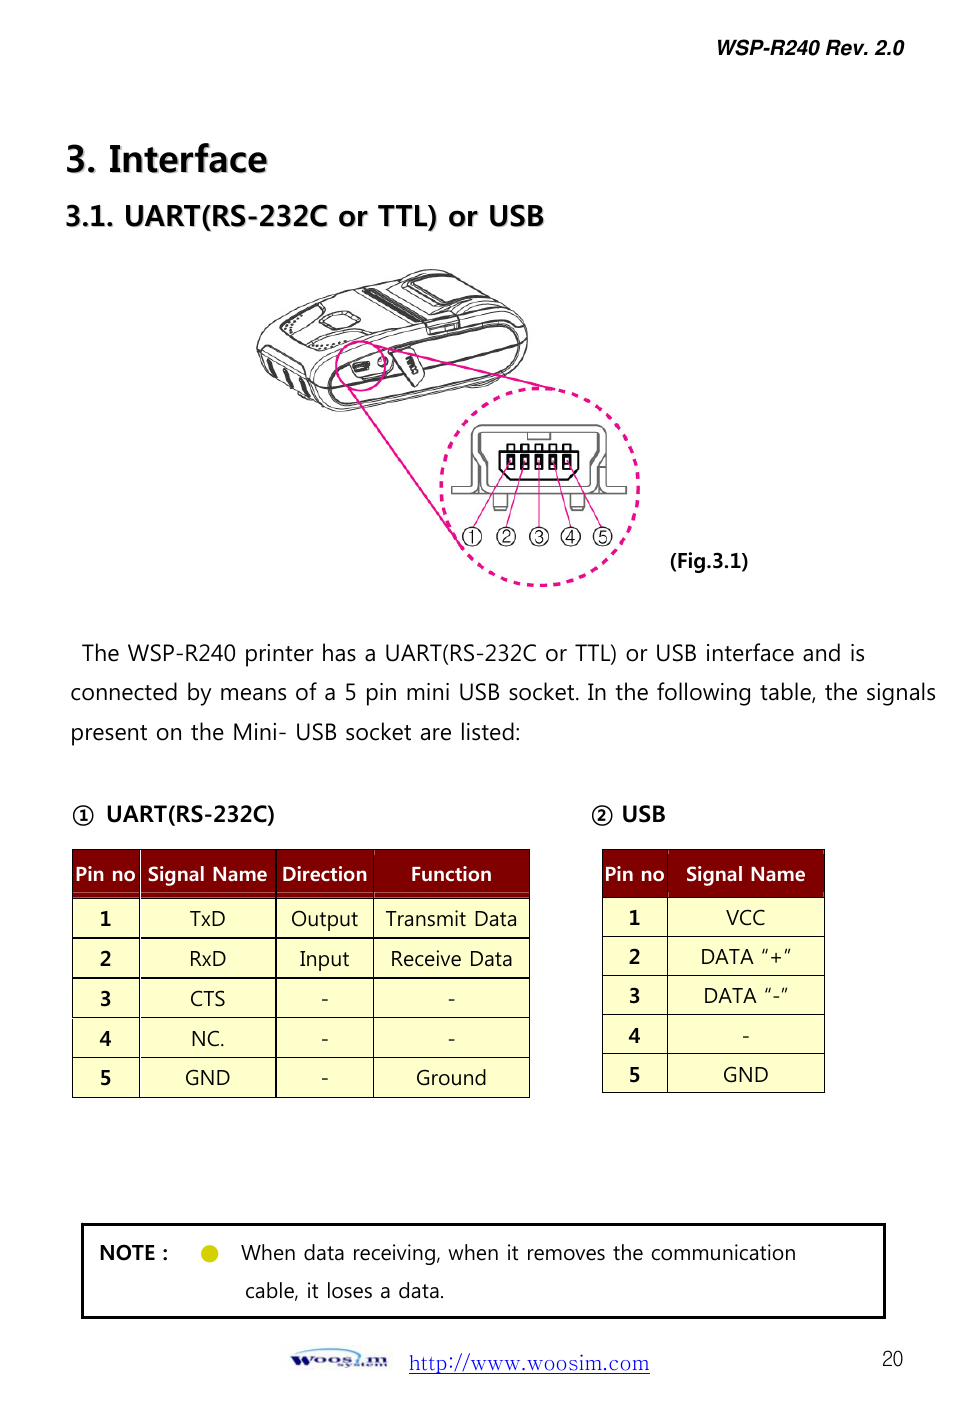 WSP-R240 Rev. 2.0     http://www.woosim.com 2033..  IInntteerrffaaccee  33..11..  UUAARRTT((RRSS--223322CC  oorr  TTTTLL))  oorr  UUSSBB                                         The WSP-R240 printer has a UART(RS-232C or TTL) or USB interface and is connected by means of a 5 pin mini USB socket. In the following table, the signals present on the Mini- USB socket are listed:                  Pin no  Signal Name  Direction  Function 1  TxD  Output  Transmit Data2  RxD  Input  Receive Data3  CTS  -  - 4  NC.  -  - 5  GND  -  Ground ①  UART(RS-232C)  ② USB NOTE :   ●    When data receiving, when it removes the communication               cable, it loses a data. (Fig.3.1) Pin no Signal Name 1  VCC 2  DATA “+” 3  DATA “-” 4  - 5  GND 